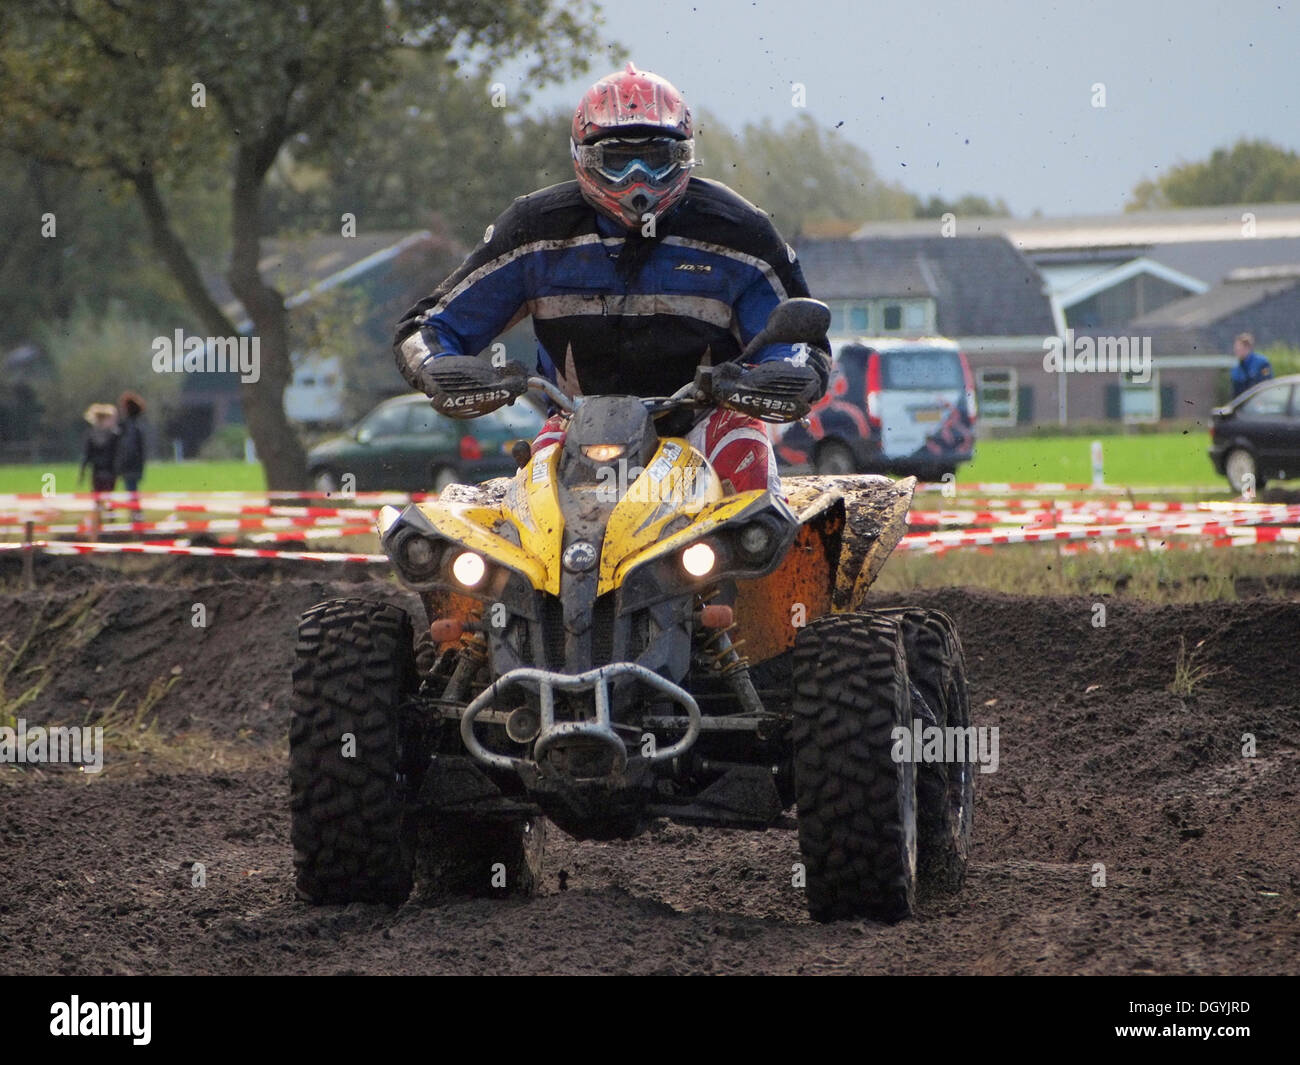 Powerful large quad riding on dirt track during the yearly enduro rallye event in Ruurlo, Gelderland, the Netherlands Stock Photo